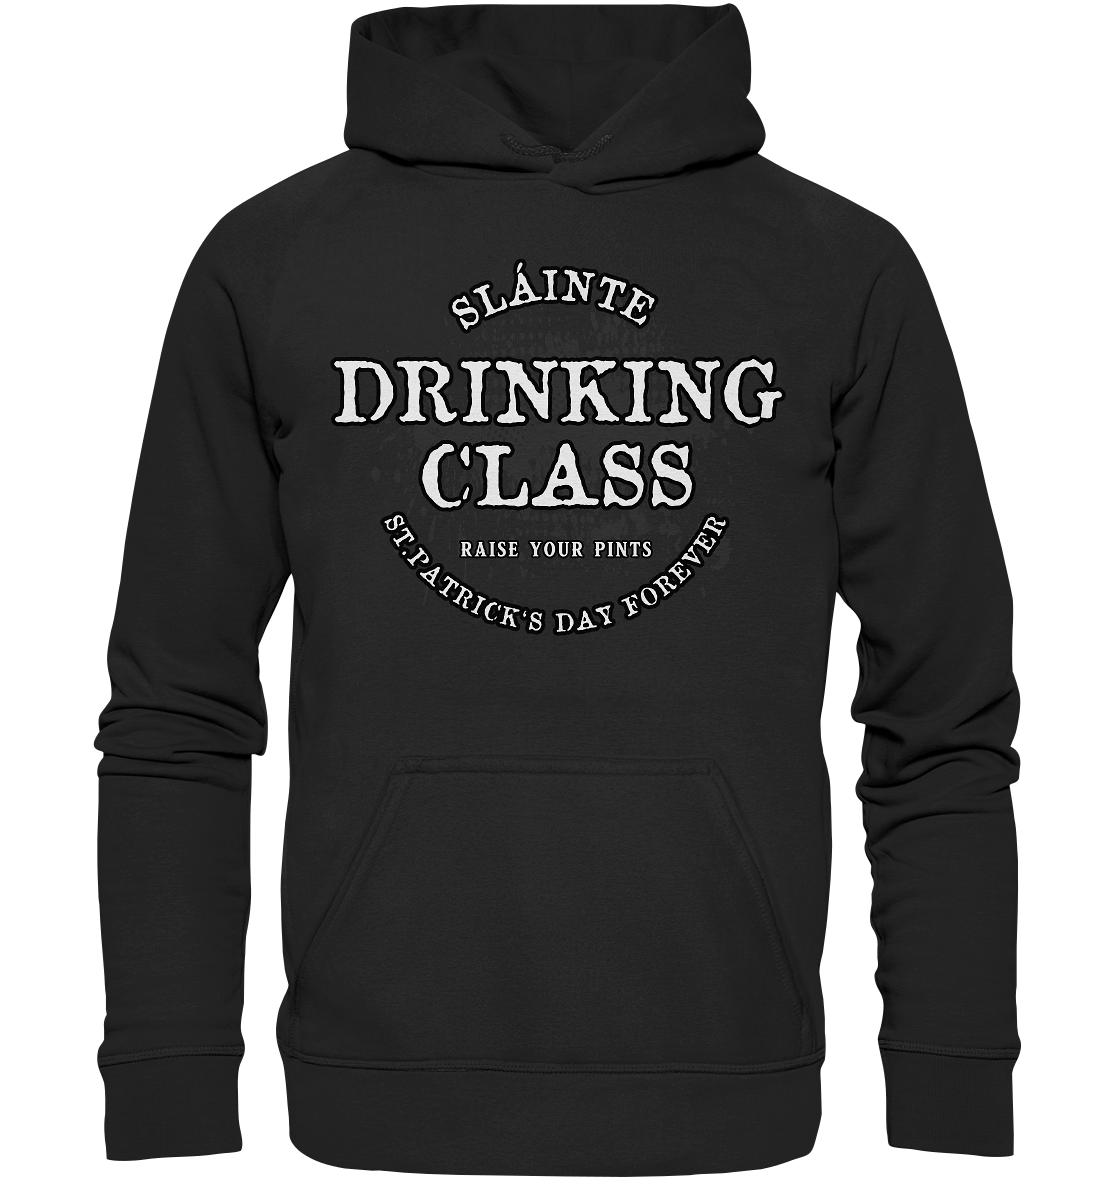 Drinking Class "St.Patrick's Day Forever" - Basic Unisex Hoodie